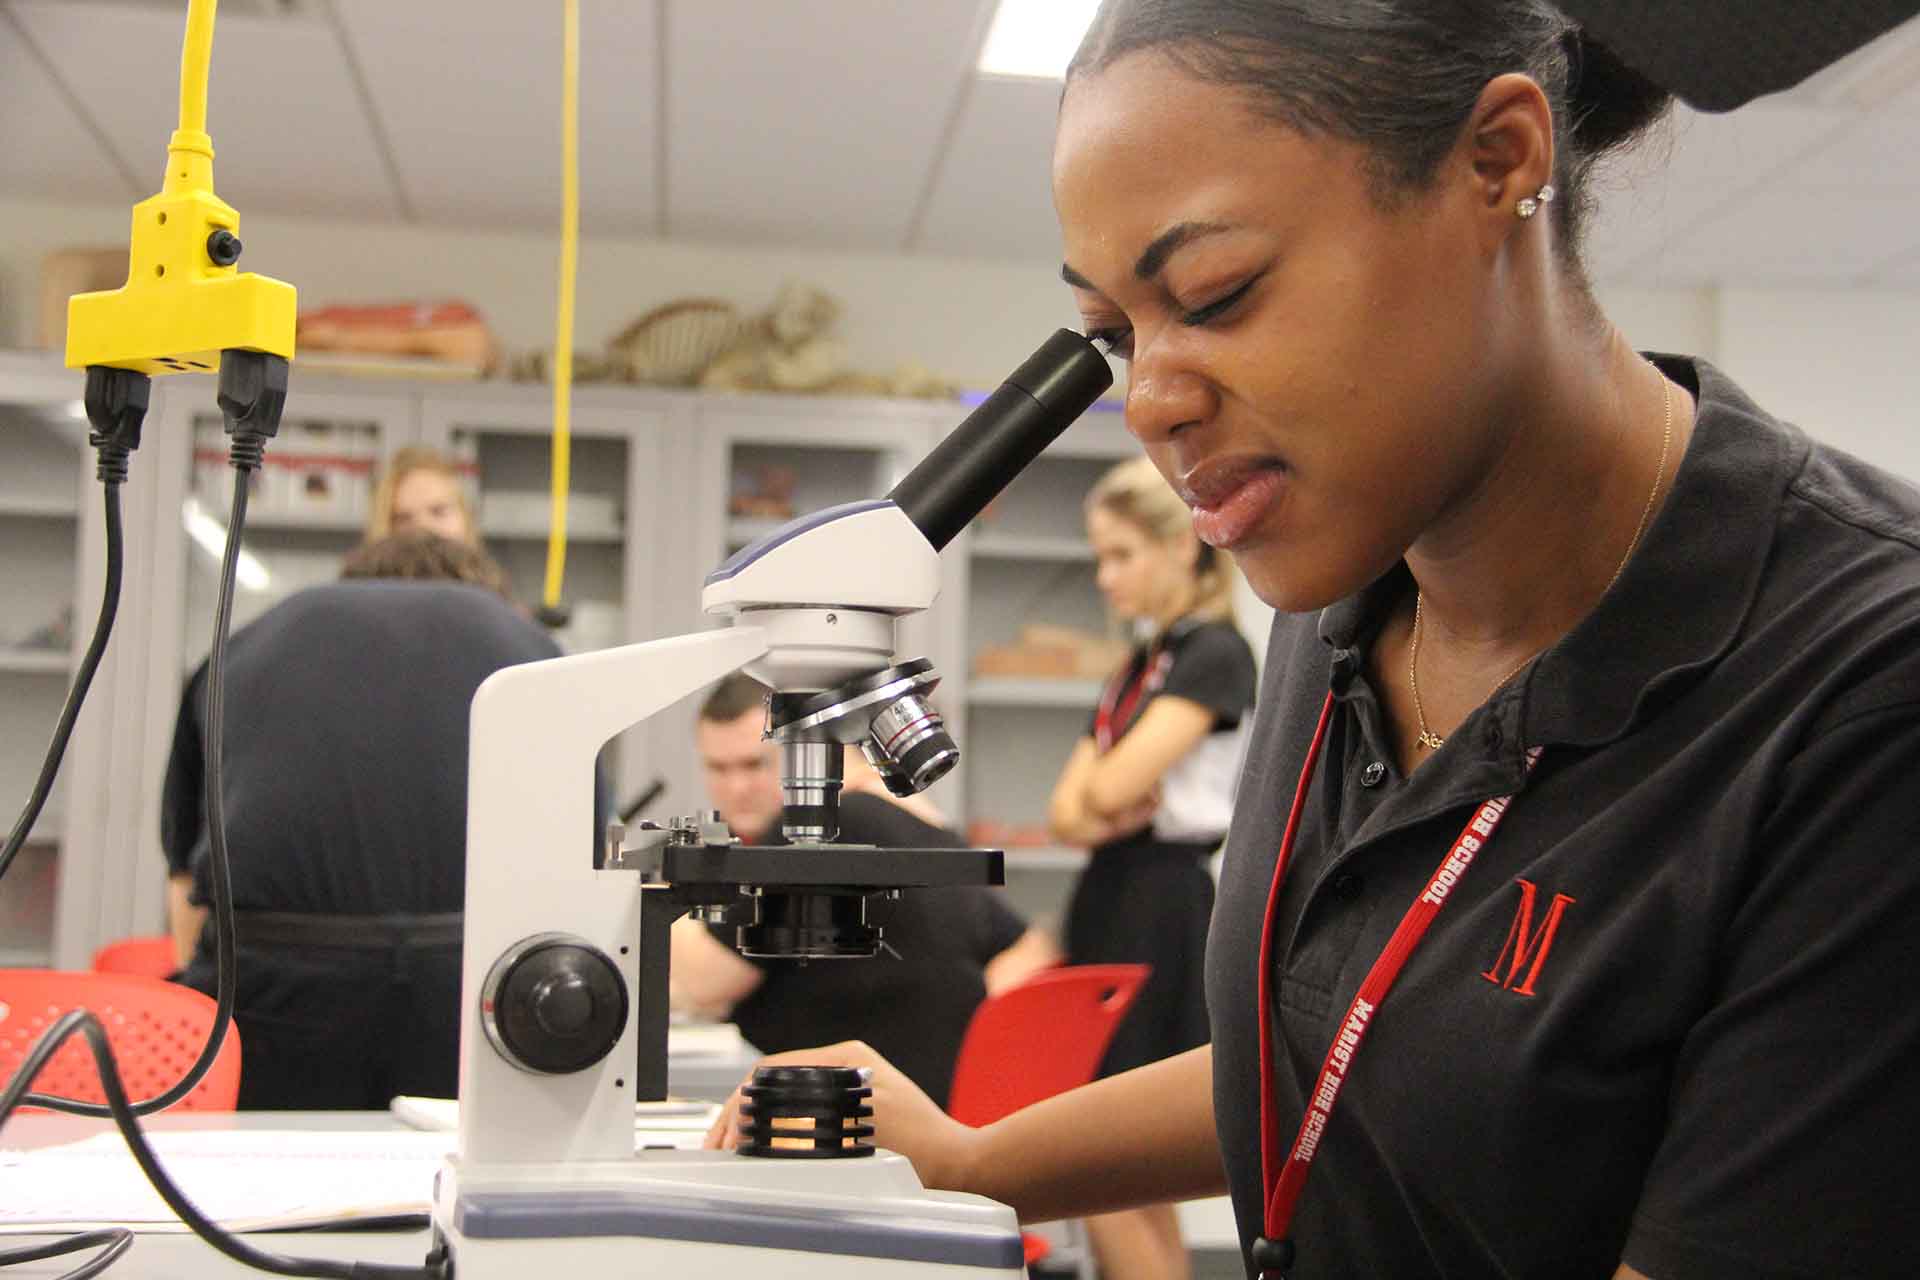 marist-science-wing-looking-through-microscope